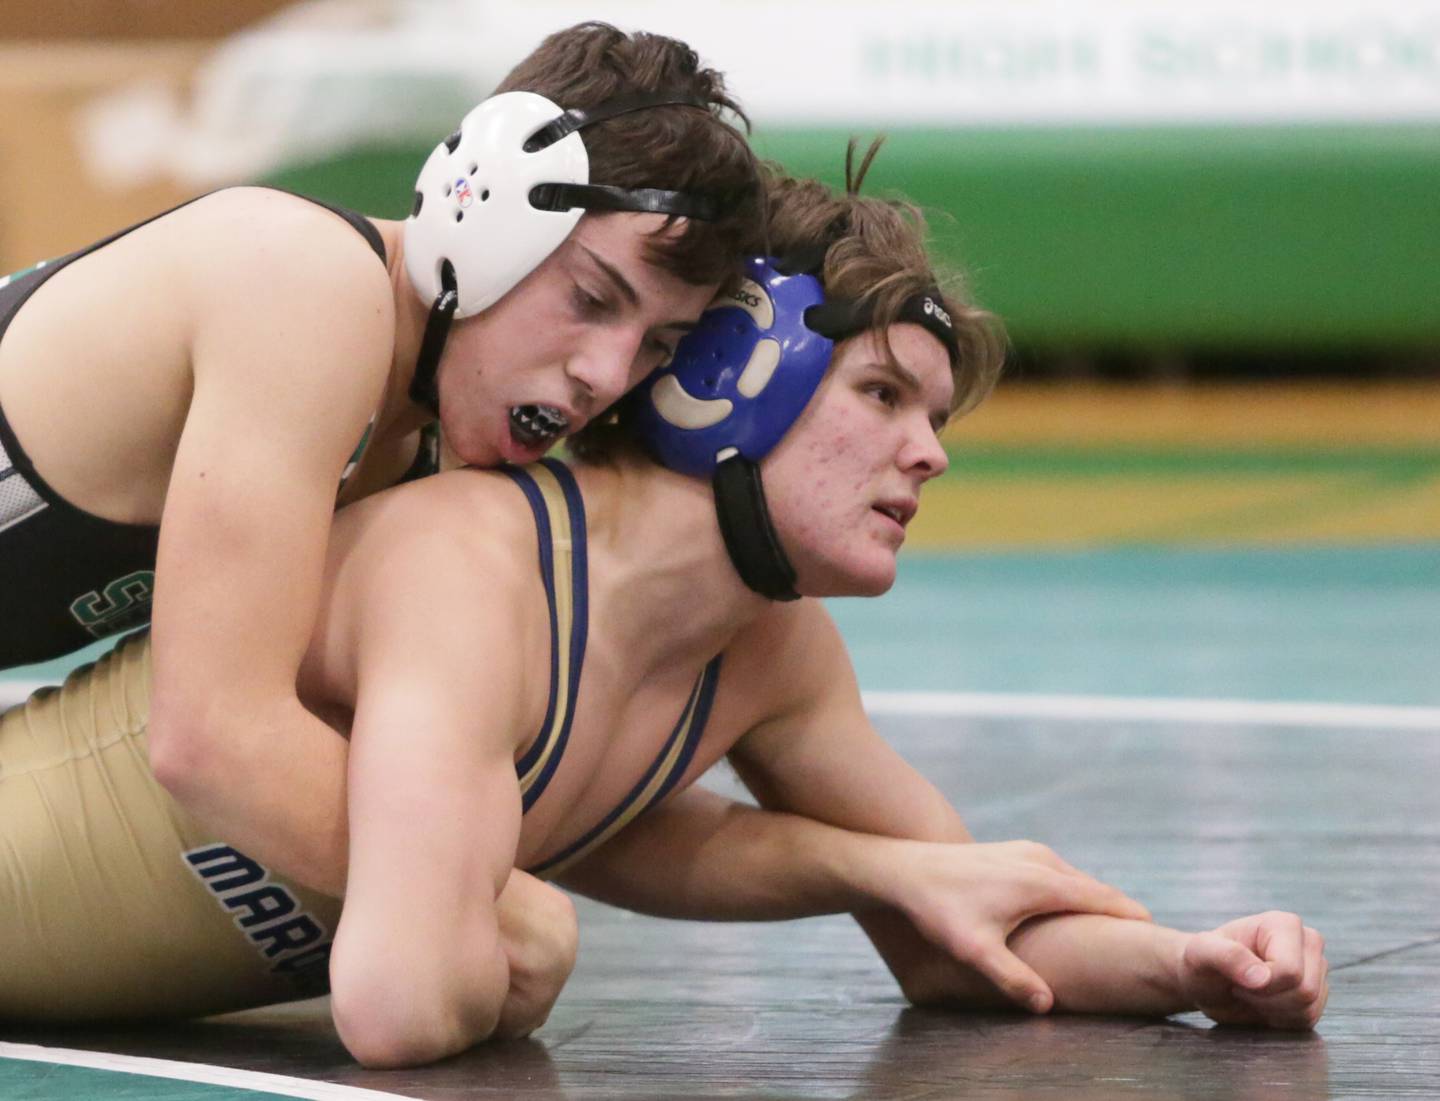 Seneca's Nate Othon controls the action against Marquette's Maclean Rinearson, in the 138-pound weight class during a triangular wrestling meet on Wednesday Jan. 12, 2022 in Seneca.